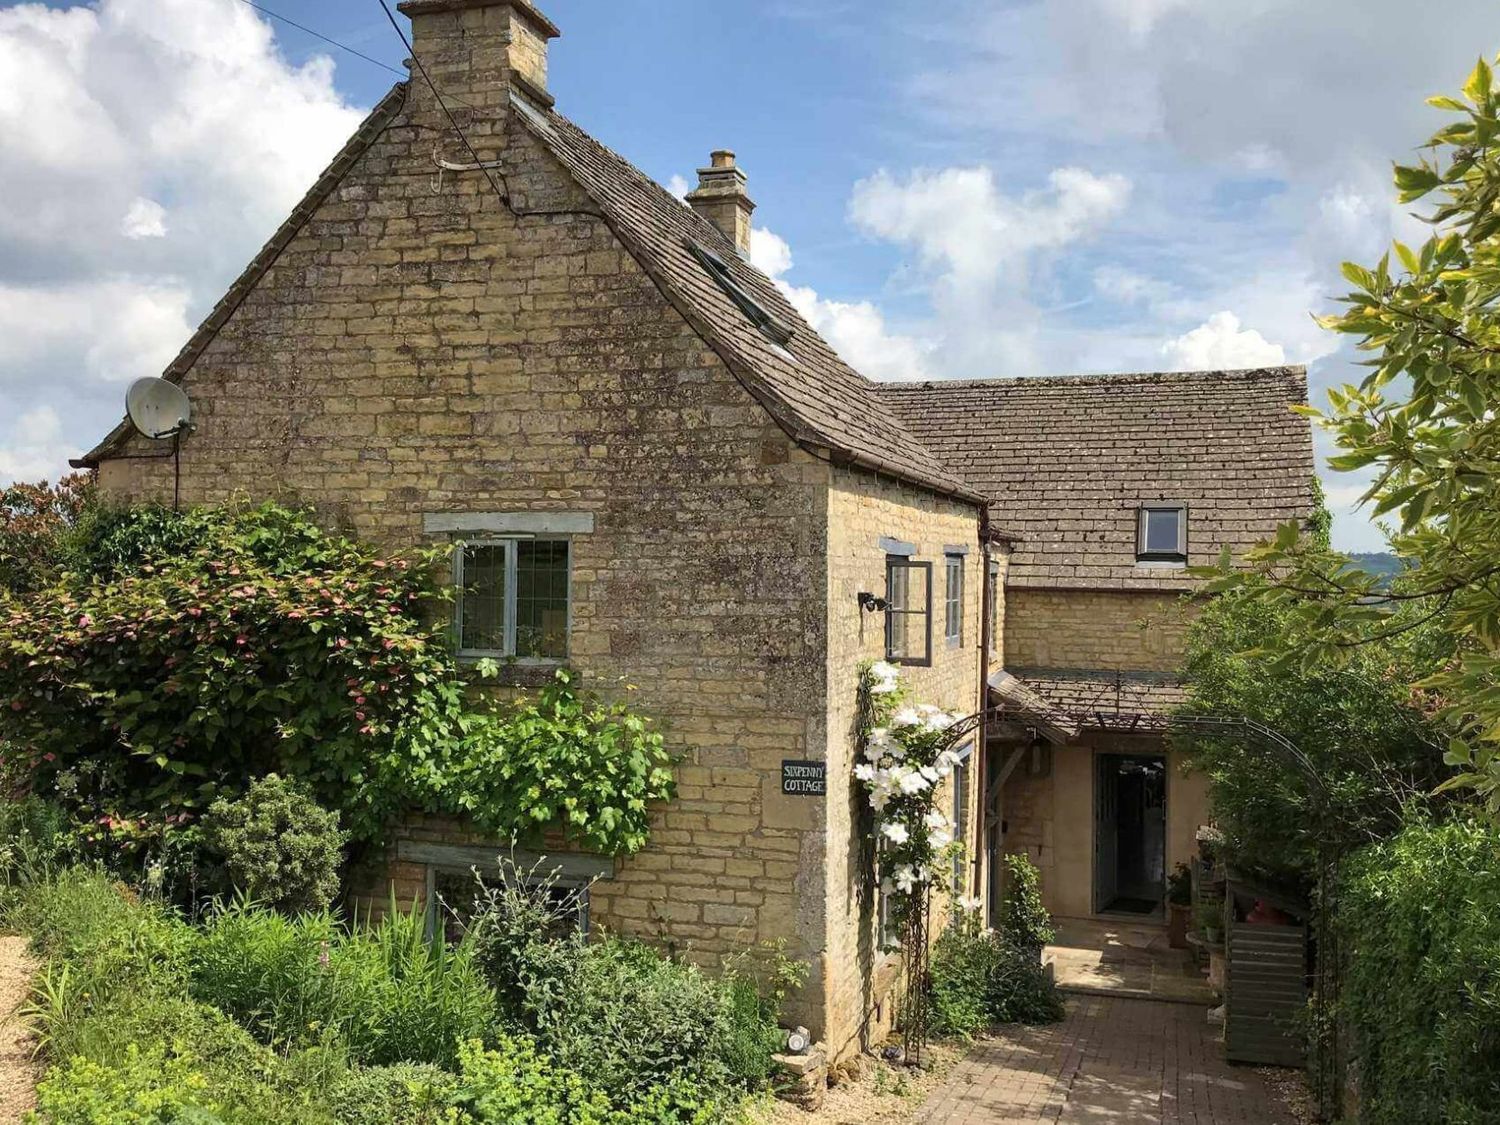 Sixpenny Cottage - Cotswolds - 1091295 - photo 1